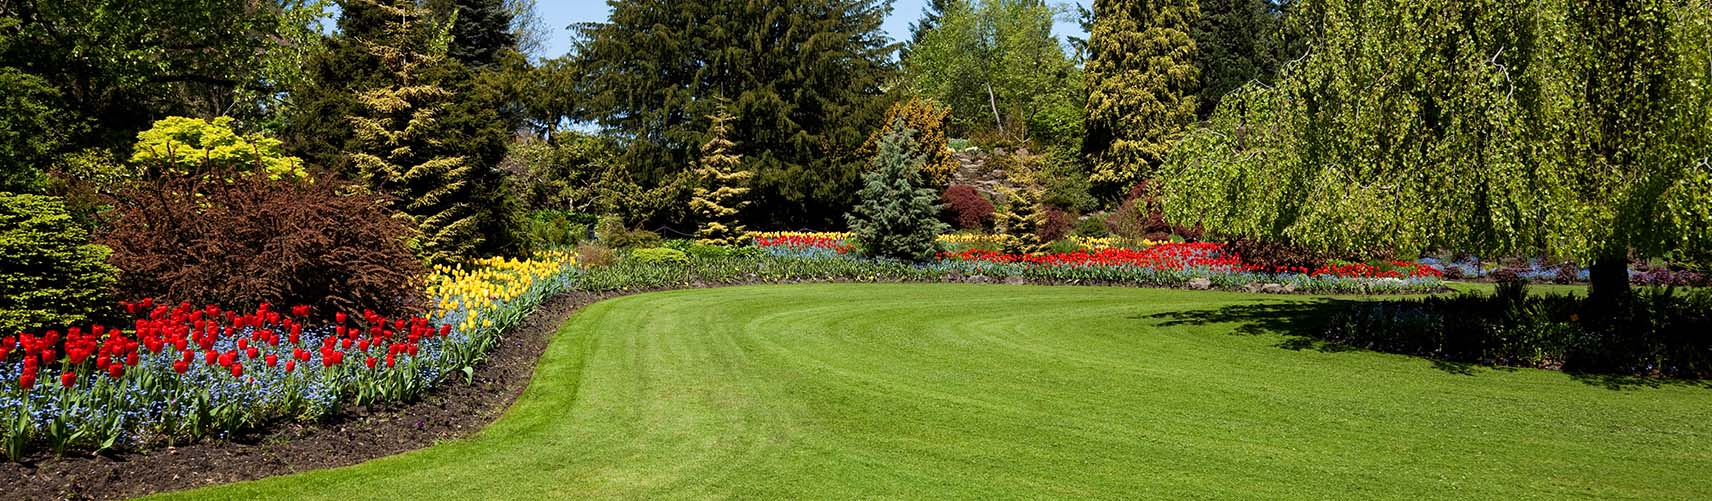 Simcoe Landscaping Company, Landscaper and Landscaping Services